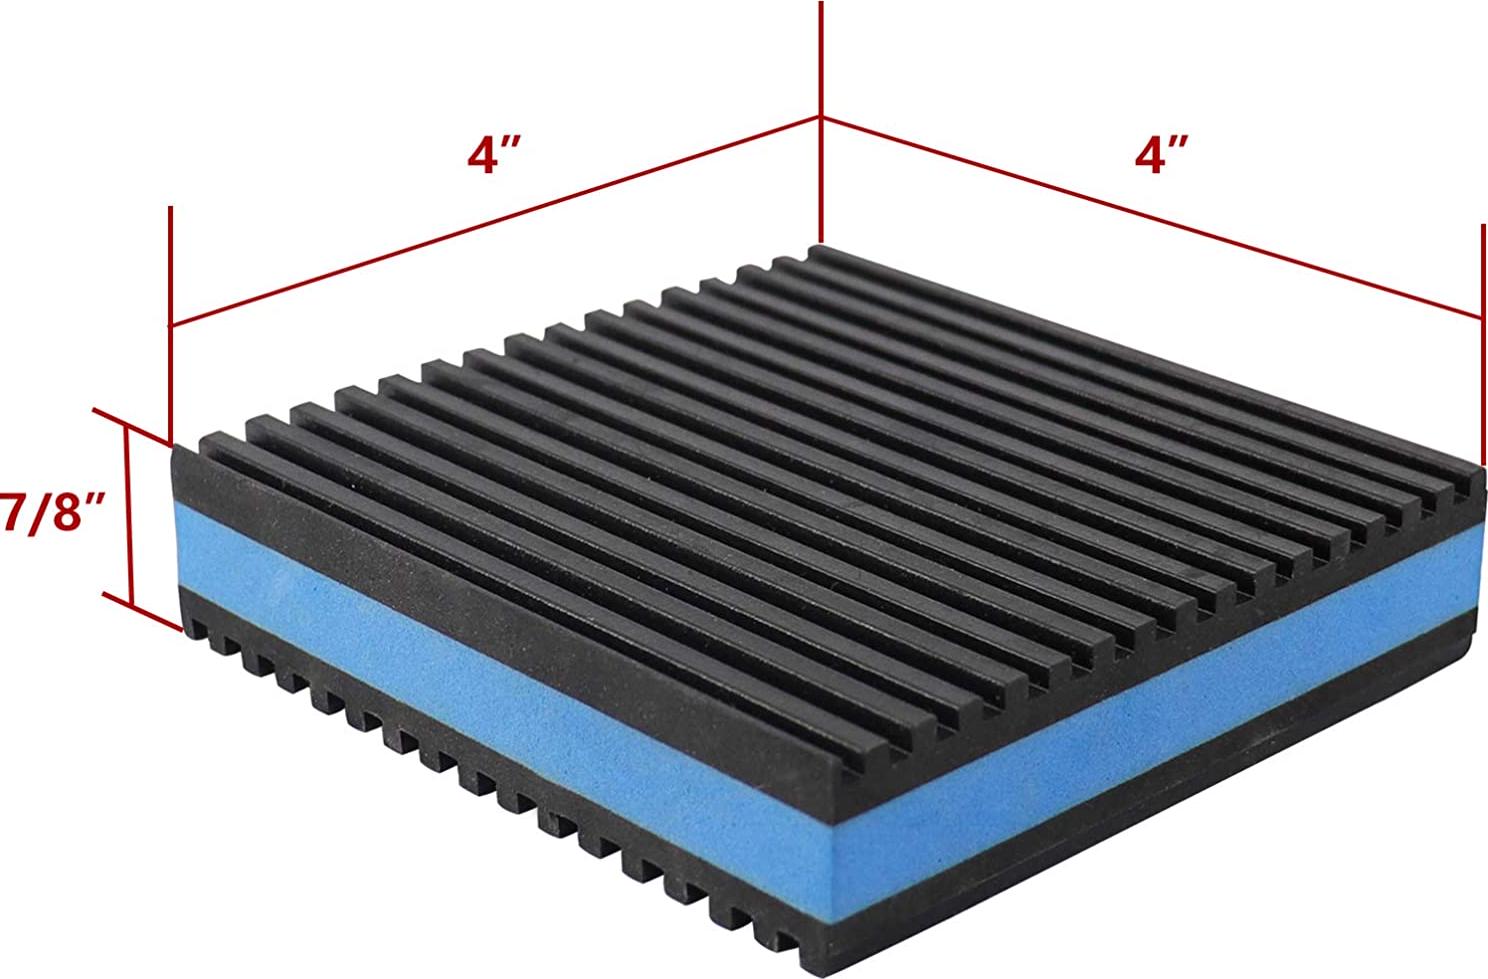 LBG Products, LBG Products Rubber Anti-Vibration Isolator Pads,Heavy Duty Blue EVA Pad for Air Conditioner,Compressors,HVAC,Treadmills etc(4'' X 4'' X 7/8 )